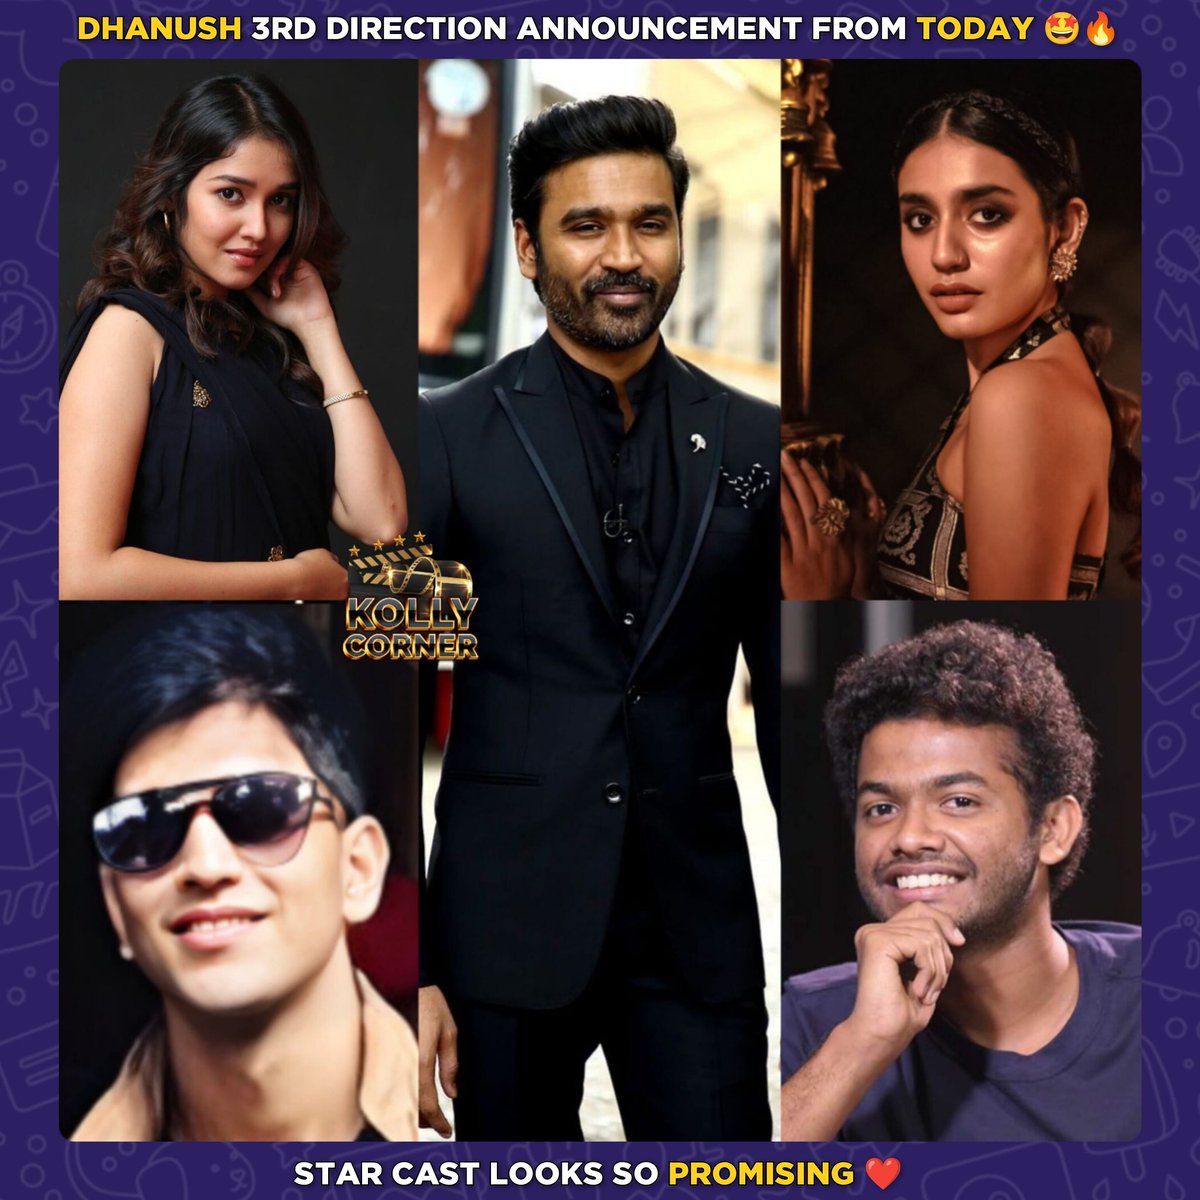 #DD3 Announcement Today 💫

- #Dhanush Directing His 3rd Film Which Starring His Nephew ( Sister's Son) #SharavanKumar & #AnikhaSurendran In The Lead Roles ❤️
- #Sarathkumar, #PriyaVarrier & #MathewThomas On-boarded To Play An Important Role 🥰
- #Dhanush Expected To Play A Cameo…